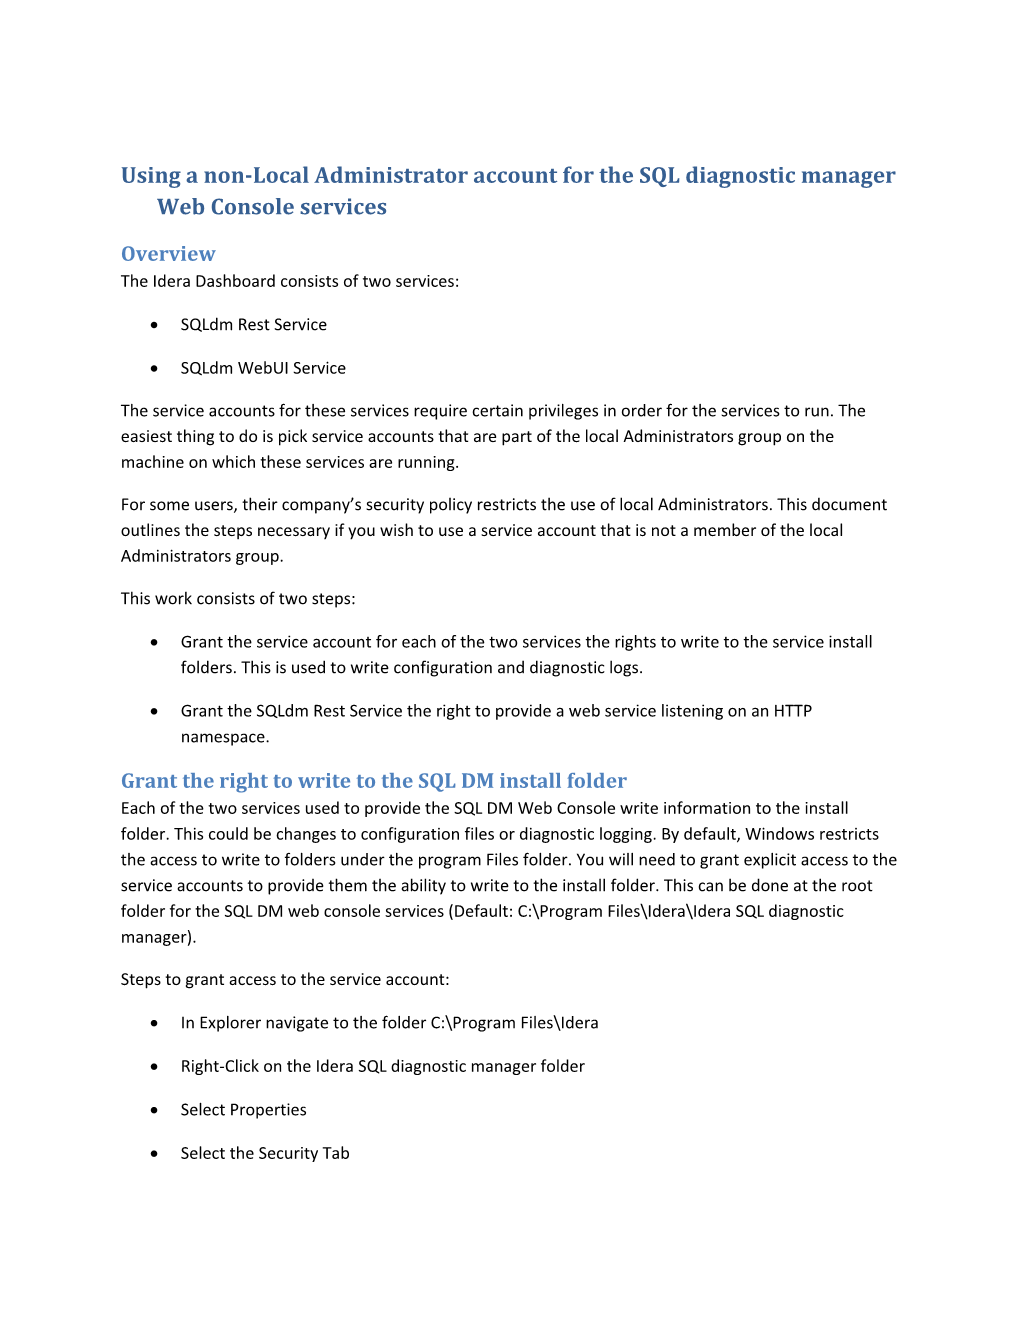 Using a Non-Local Administrator Account for the SQL Diagnostic Manager Web Console Services